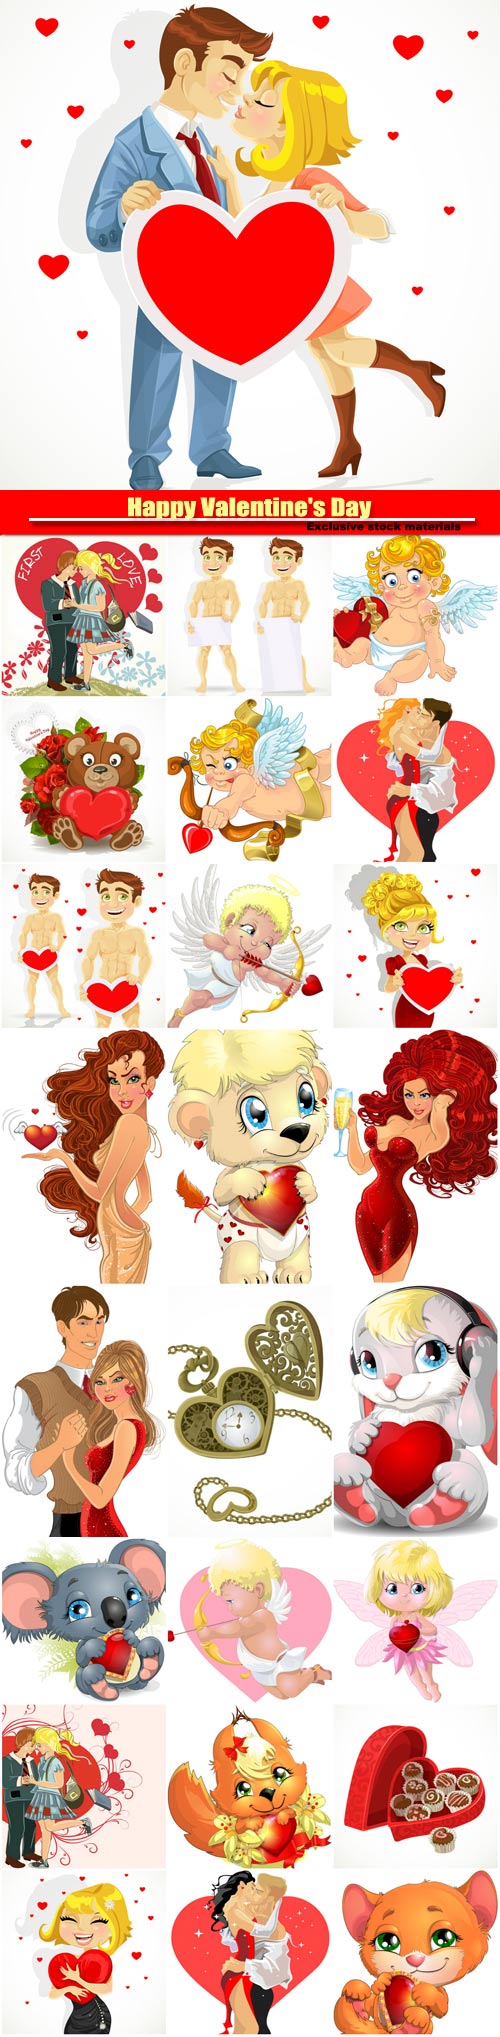 Happy Valentine's Day vector, couples, funny animals with hearts